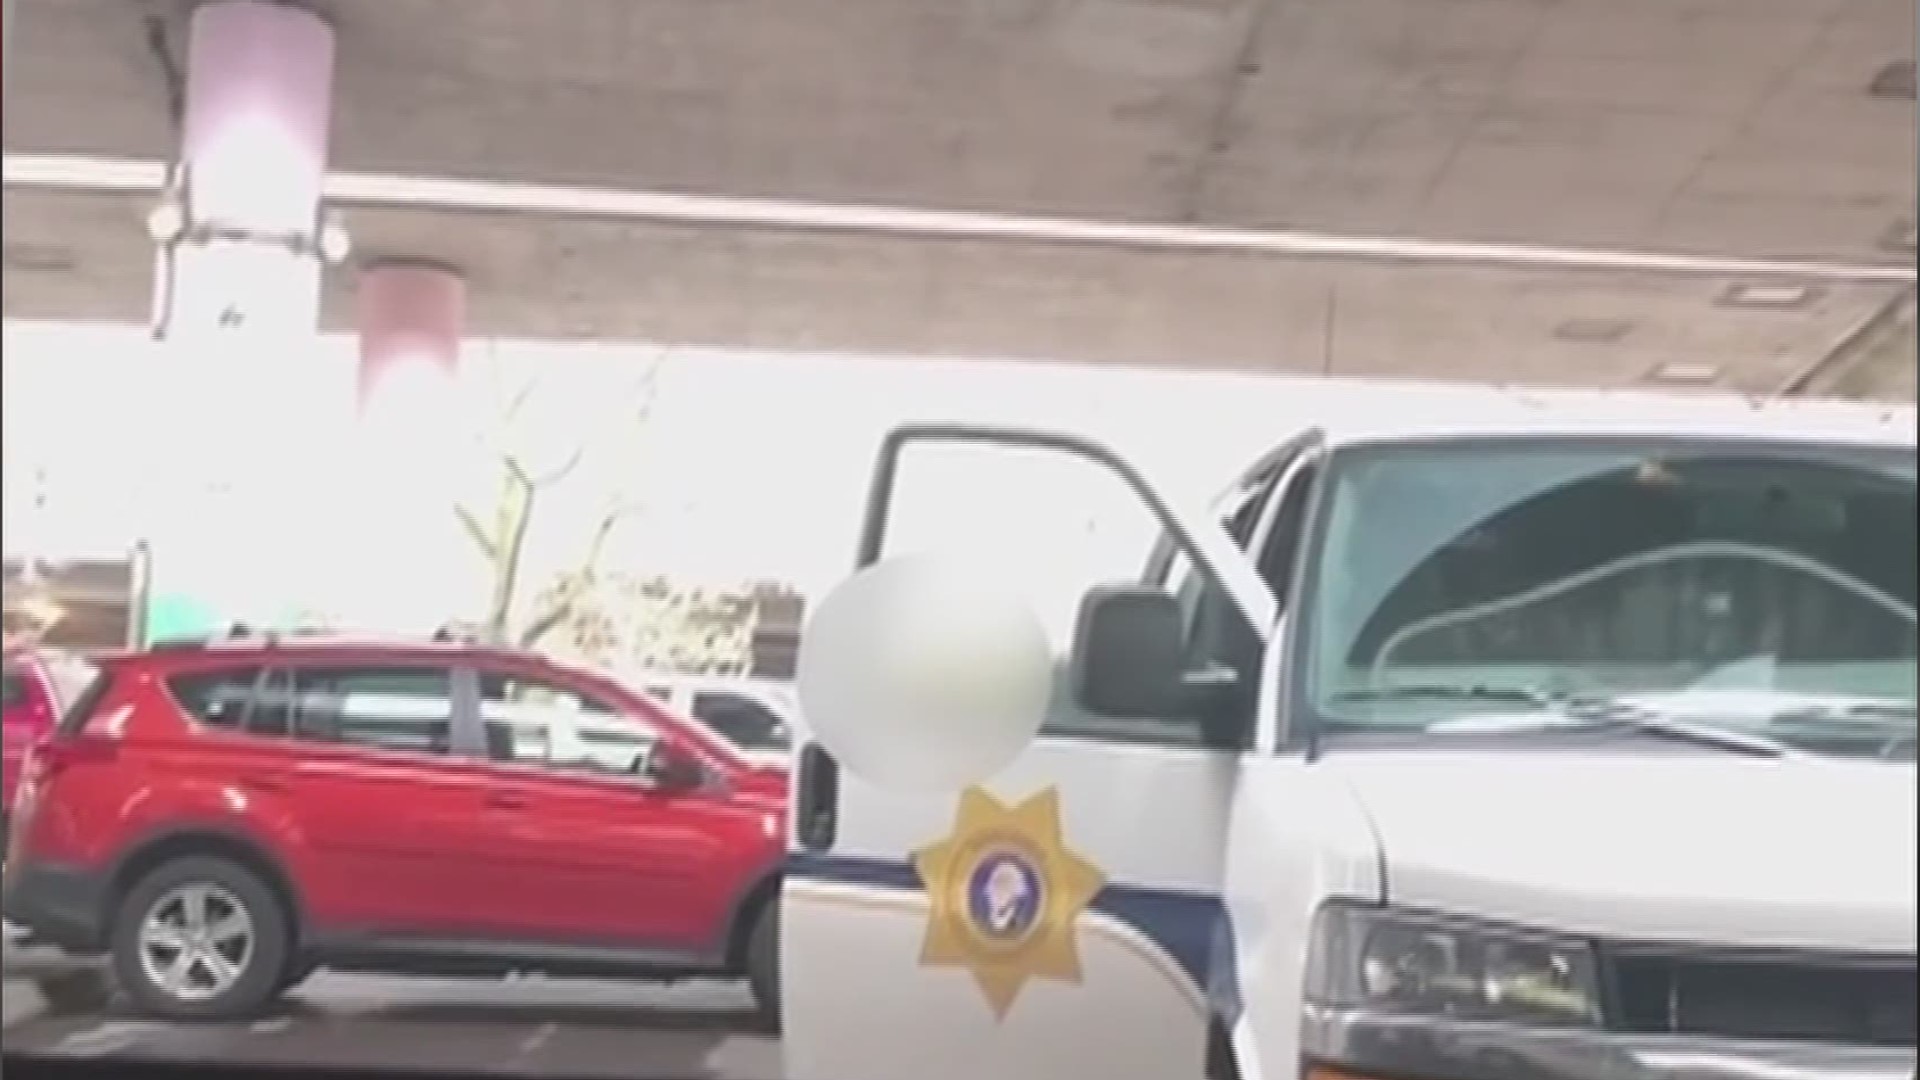 The City of Seattle has accused the Yakima County Department of Corrections with offloading multiple inmates underneath I-5, in any area populated with unsheltered residents. Video shared by Mayor Jenny Durkan's office.